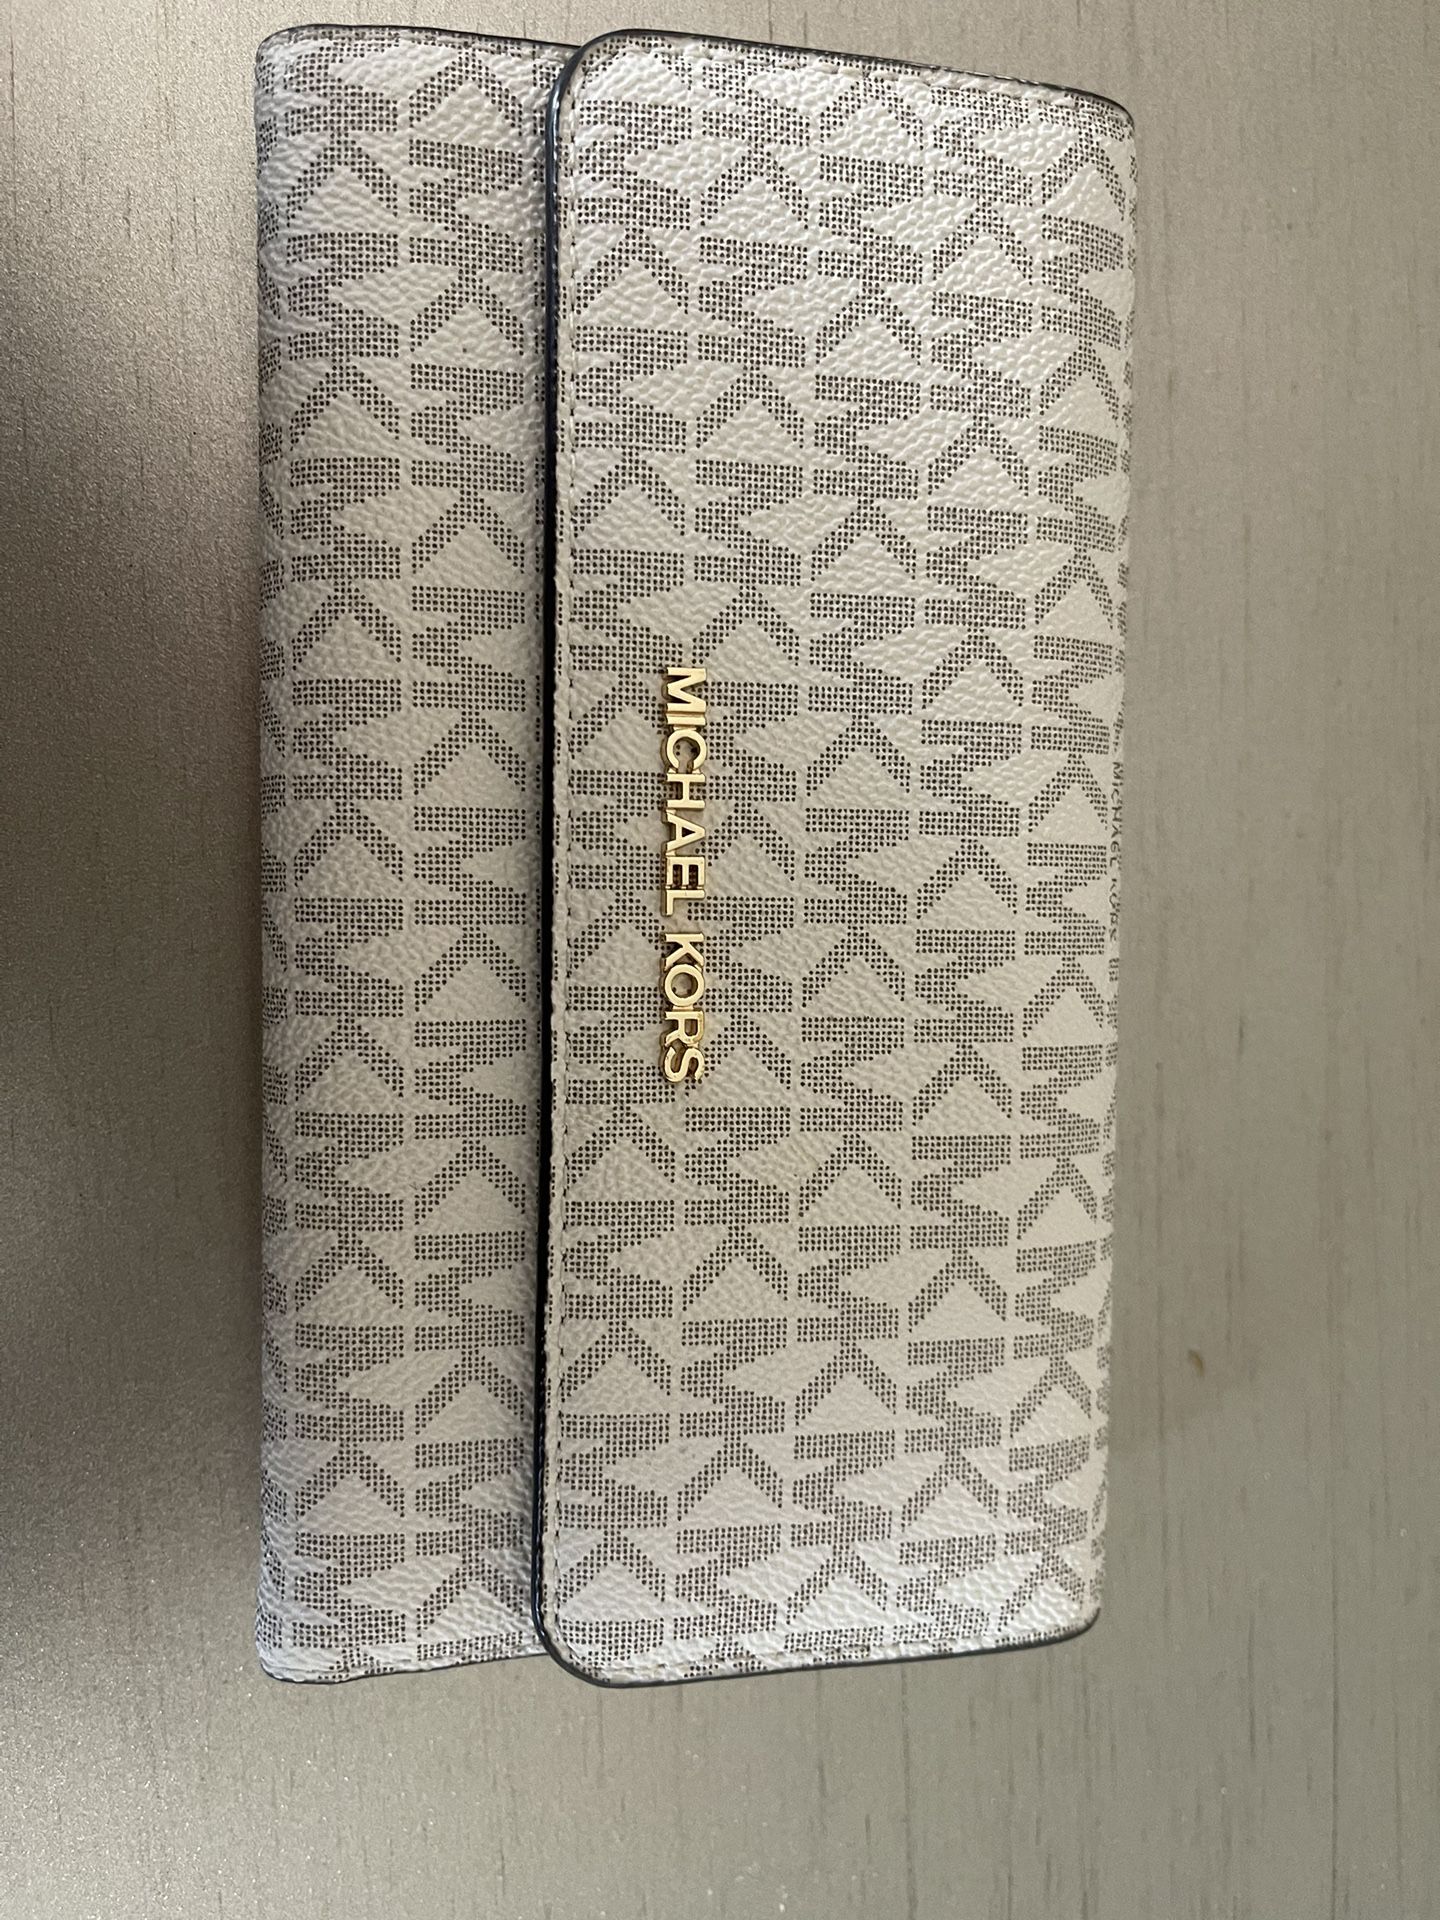 New Michael Kors Wallet Beautiful Asking $75!!!great For Mothers Day Gift 